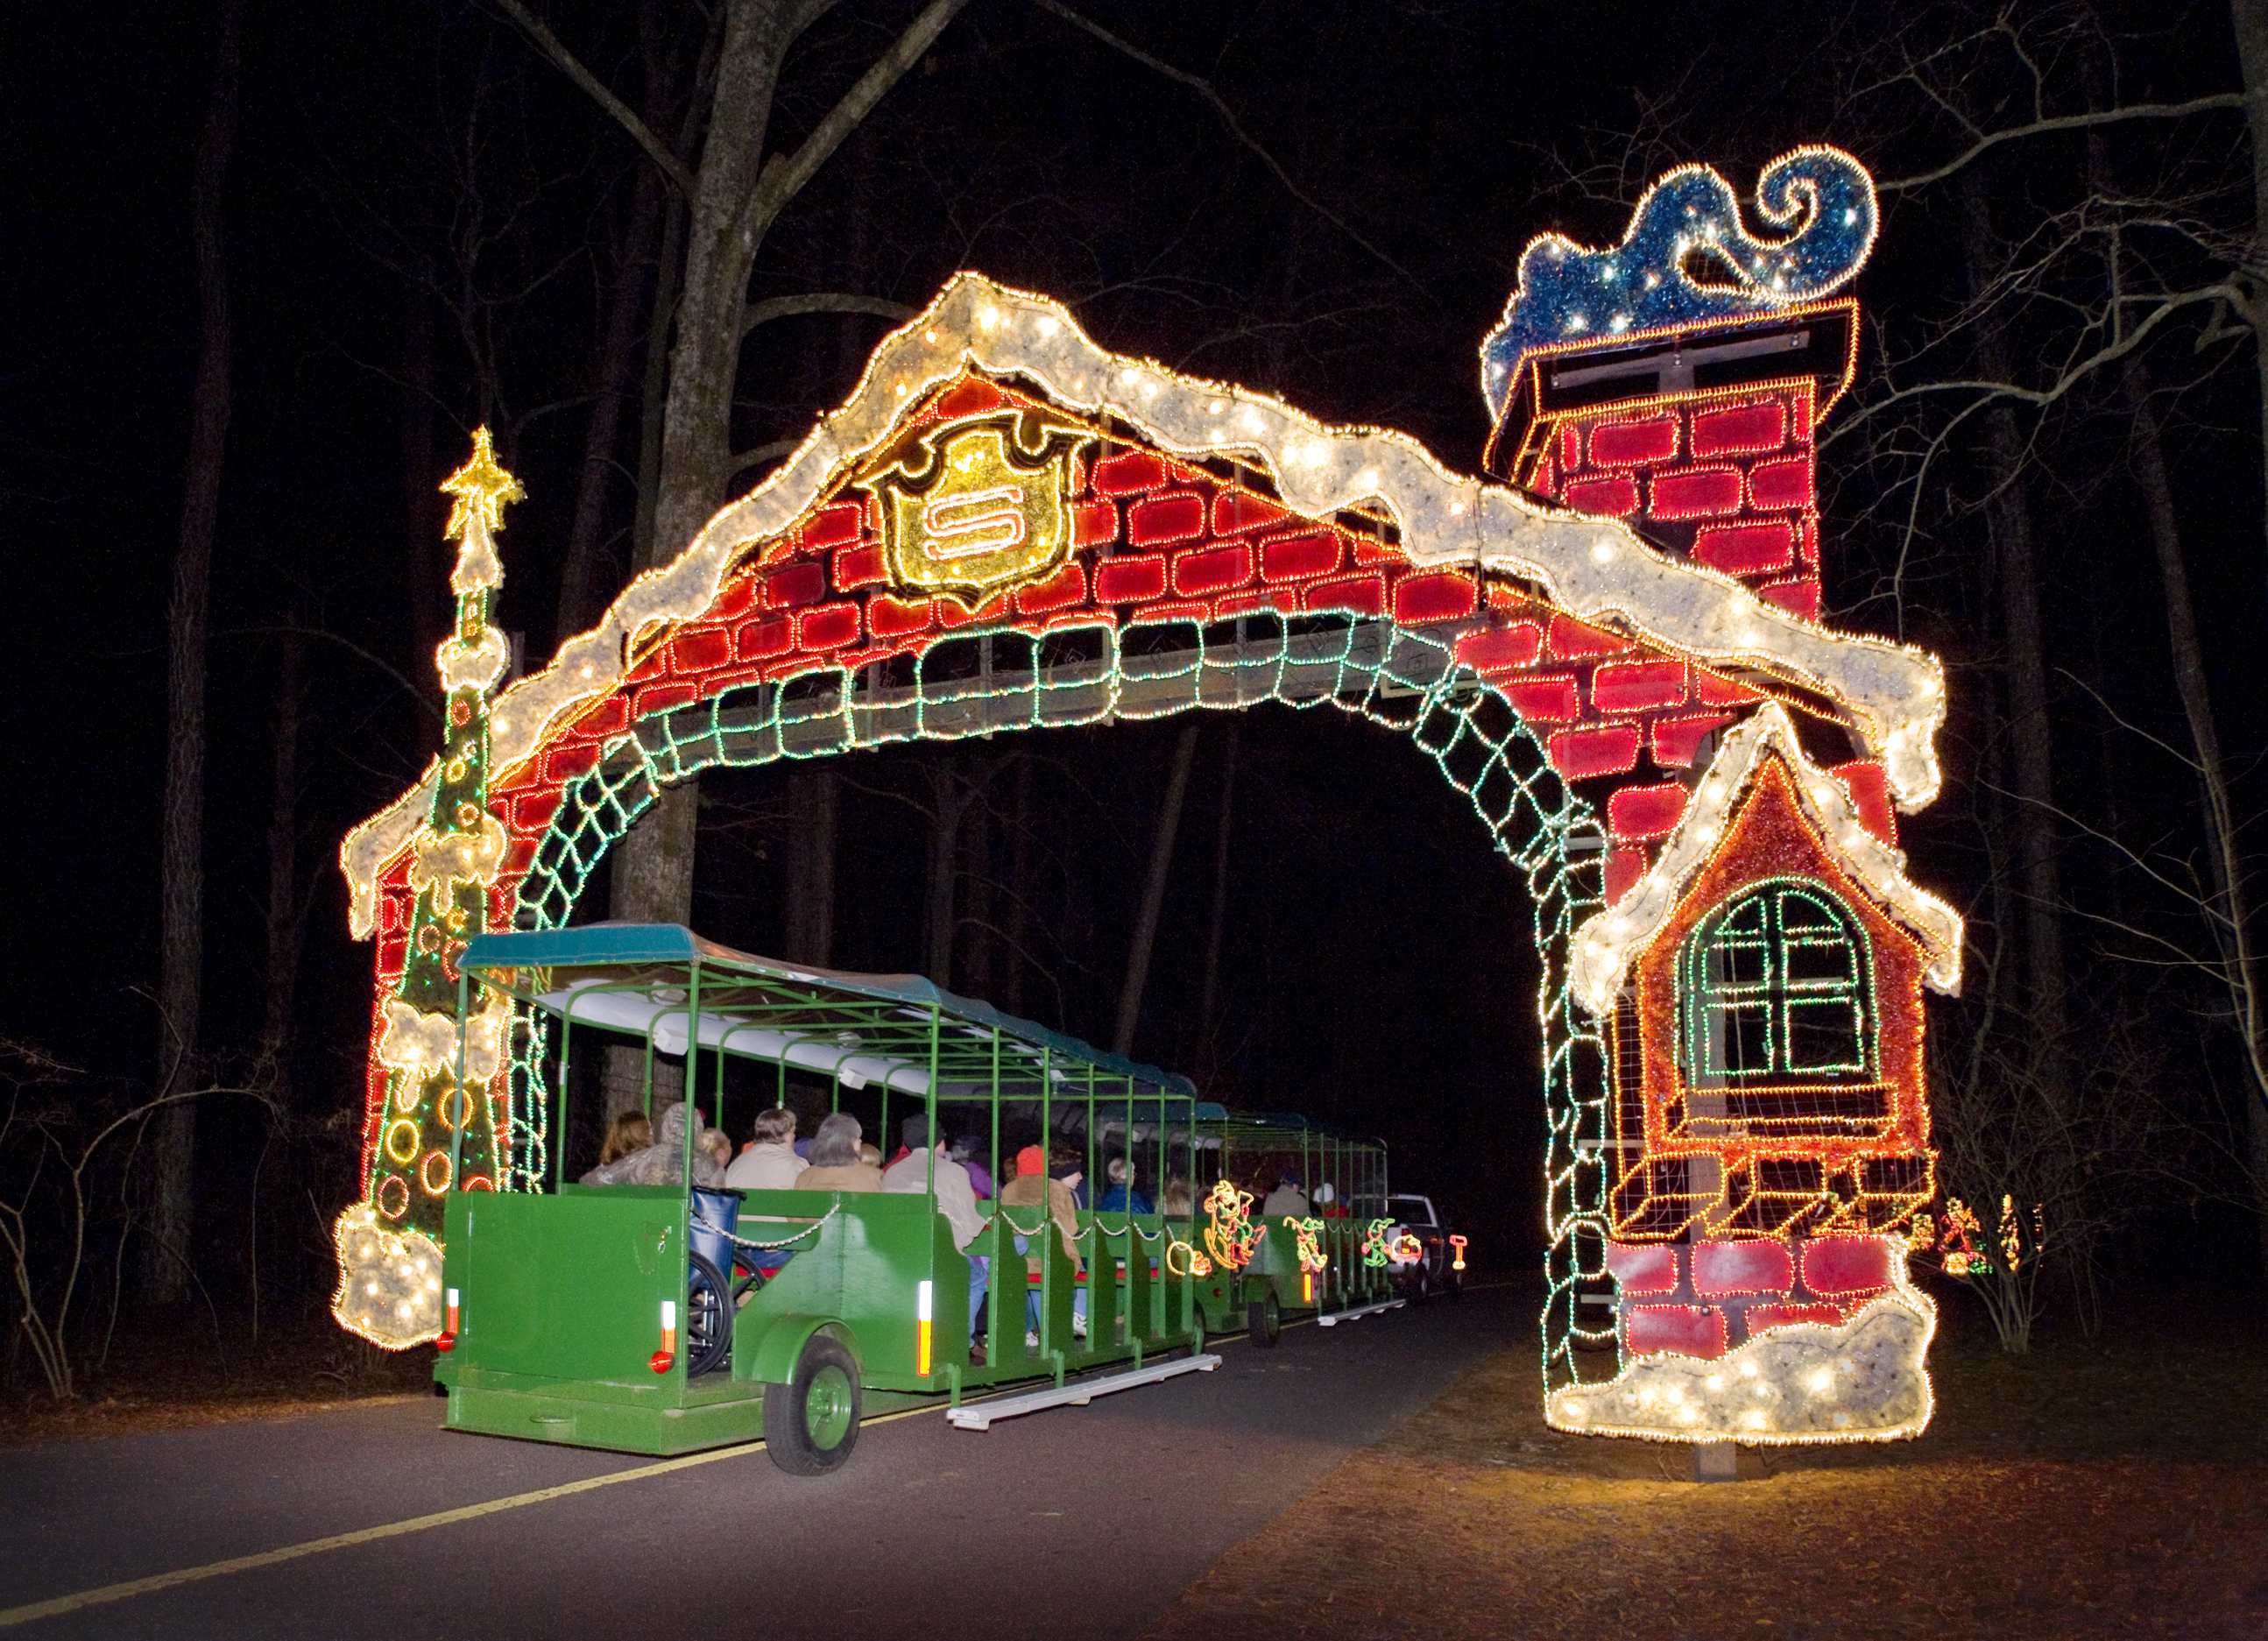 Fantasy in Lights at Callaway Gardens, a Spectaular Light and Sound